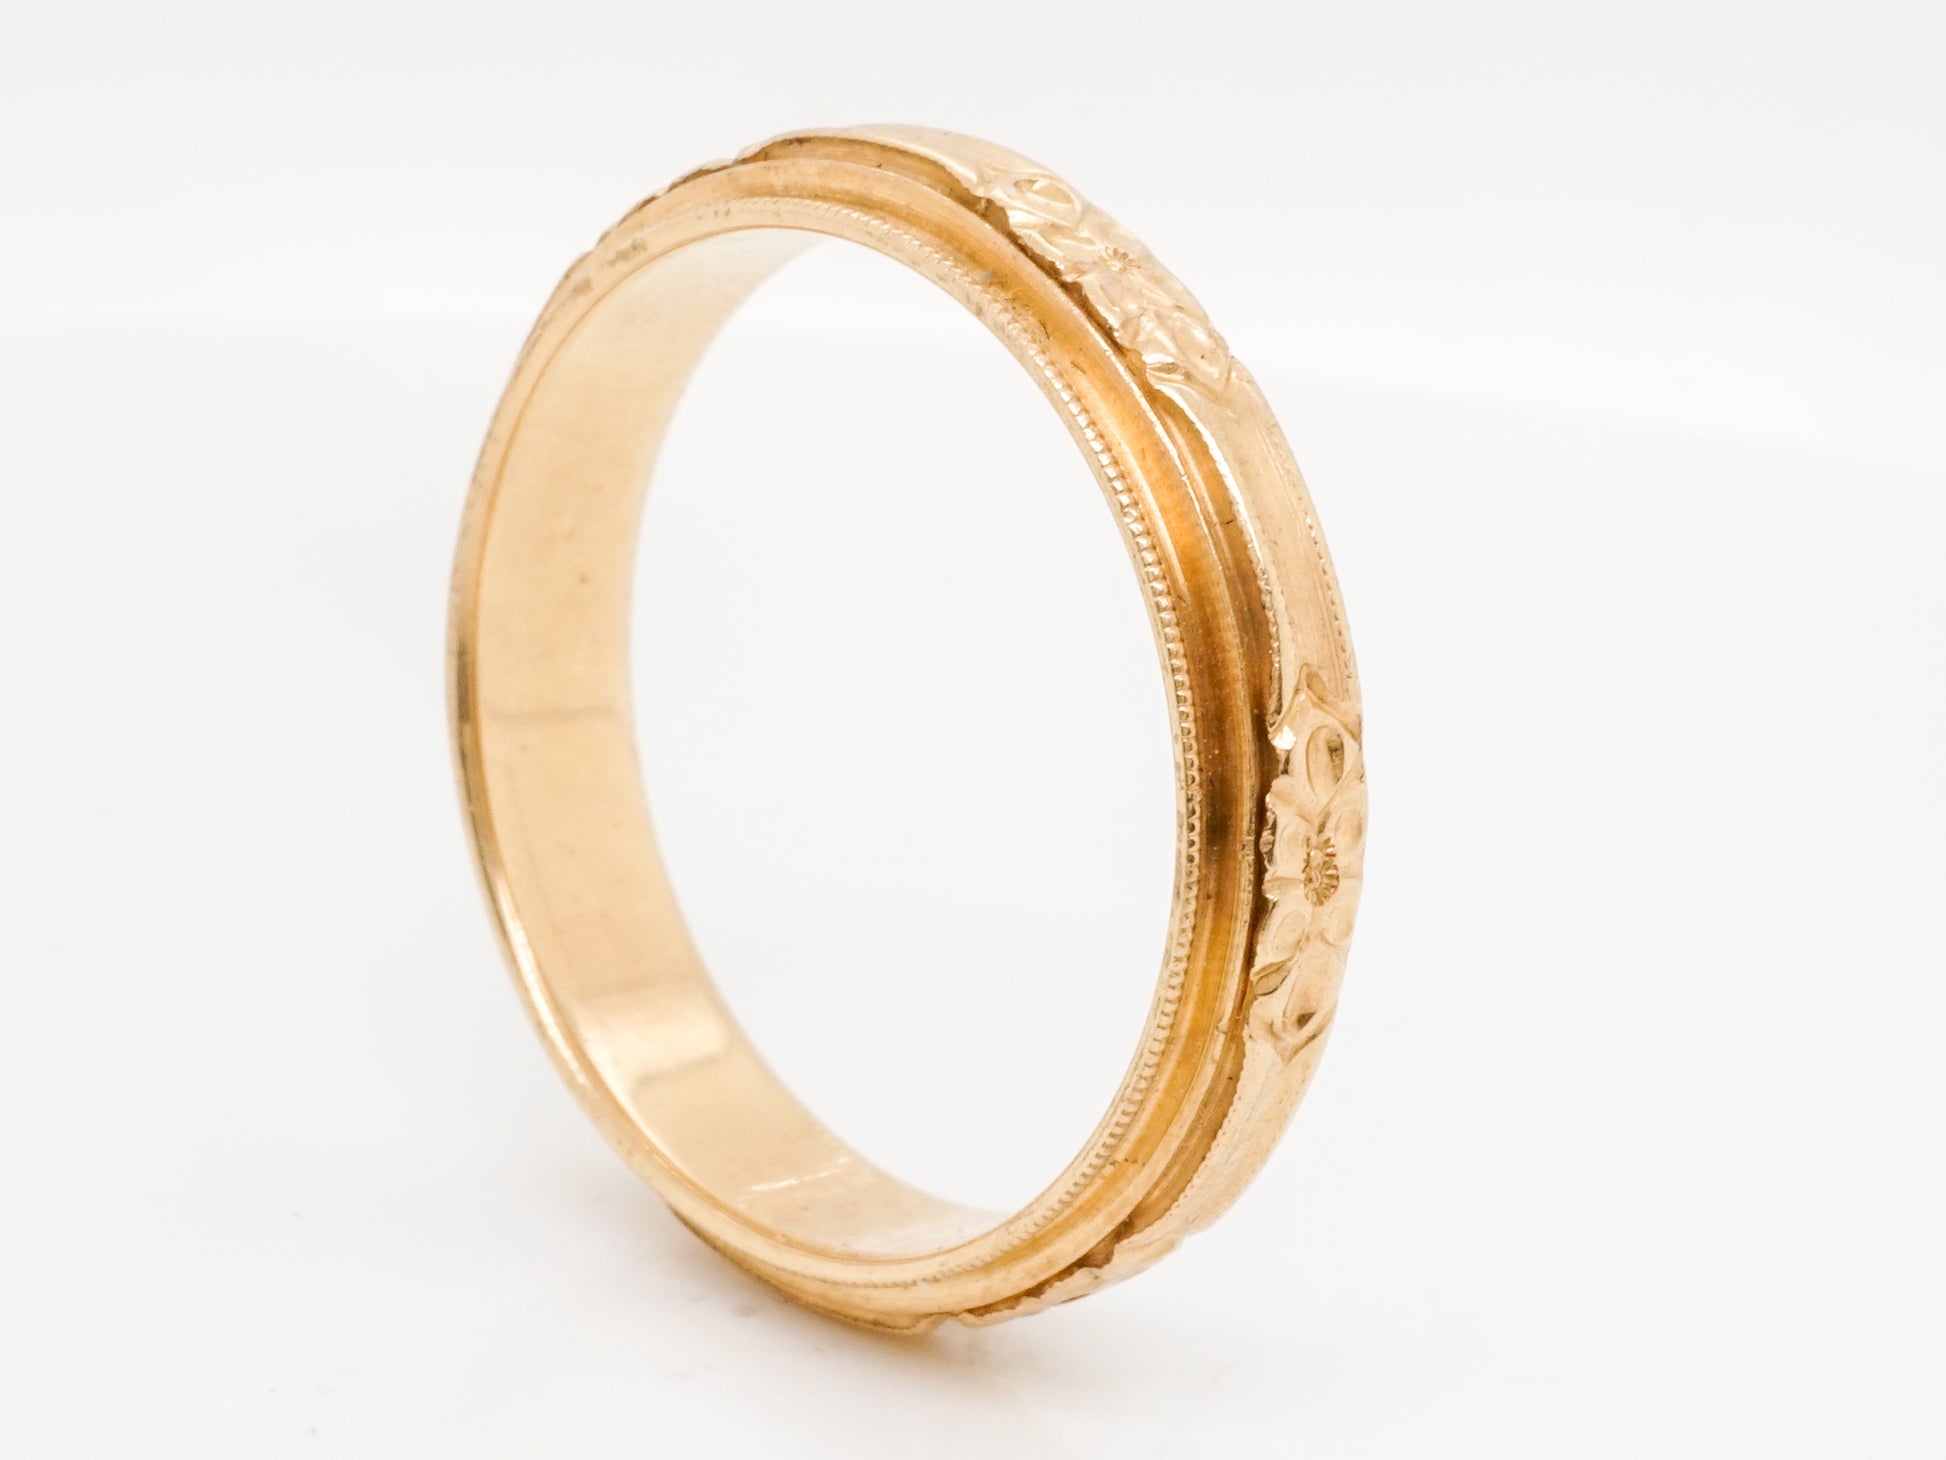 Antique Deco Engraved Wedding Band in 14k Yellow Gold